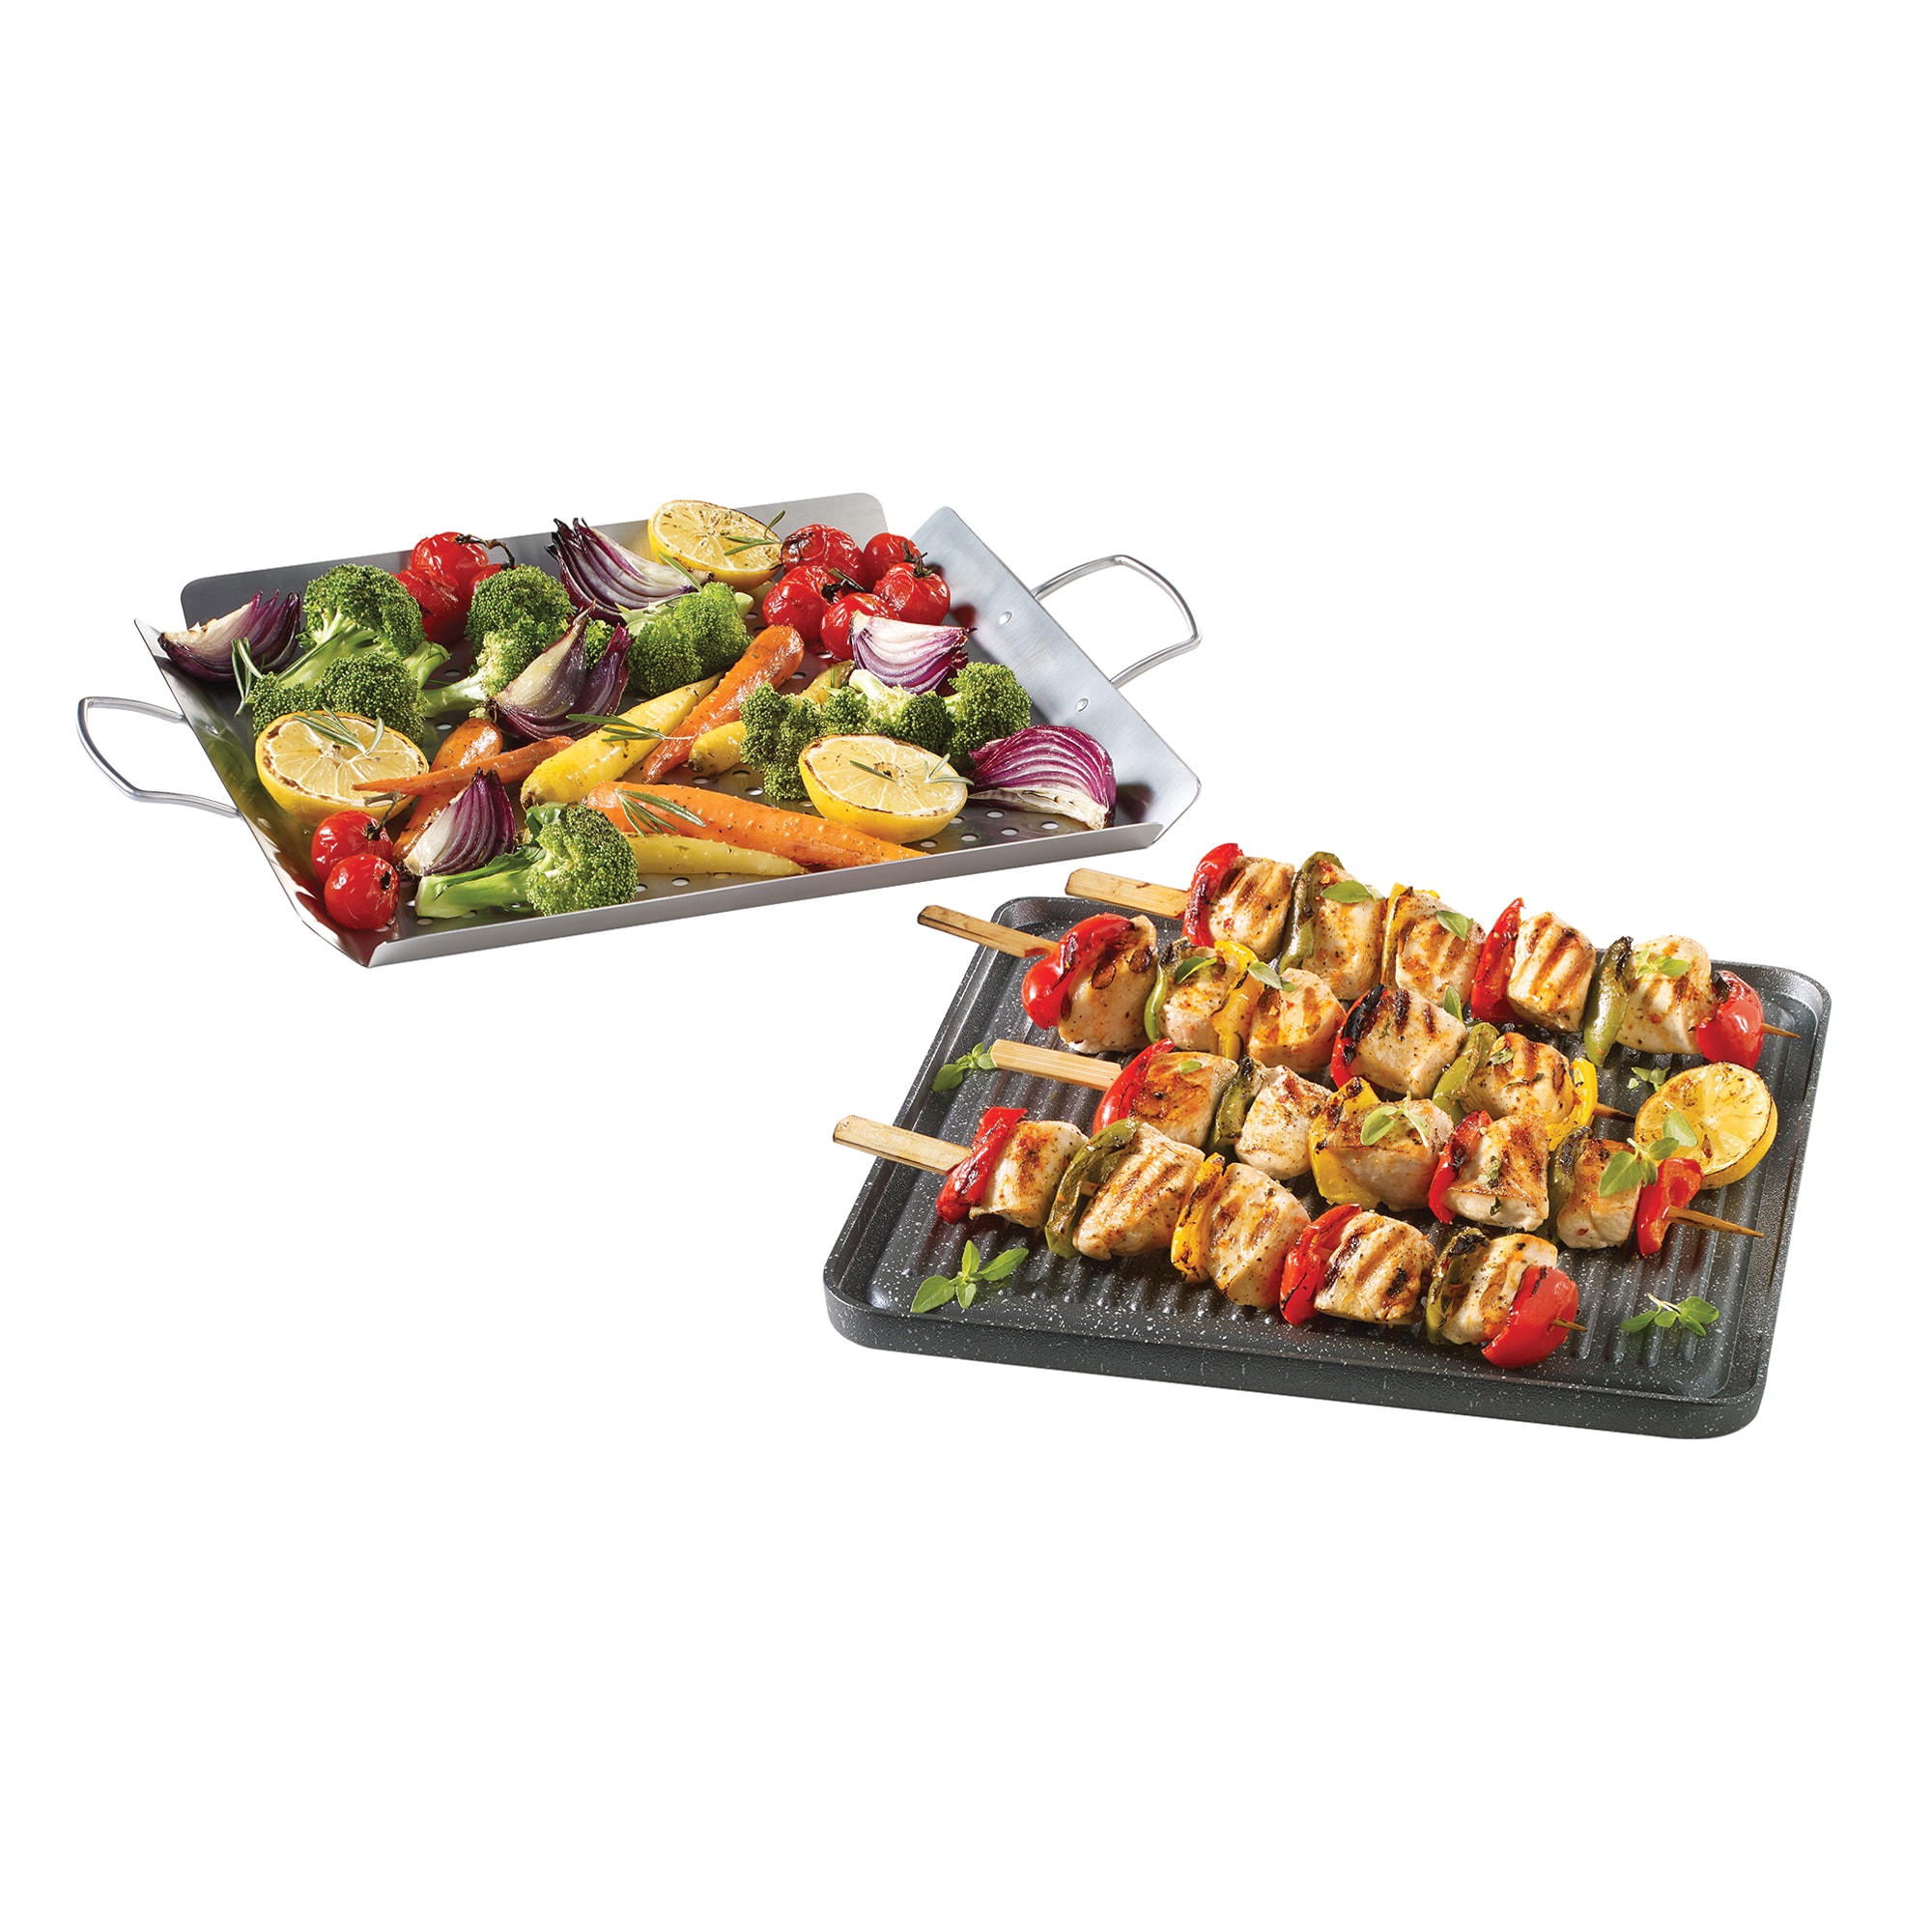 Starfrit The Rock Reversible Grill/Griddle - Silver, 1 ct - Mariano's